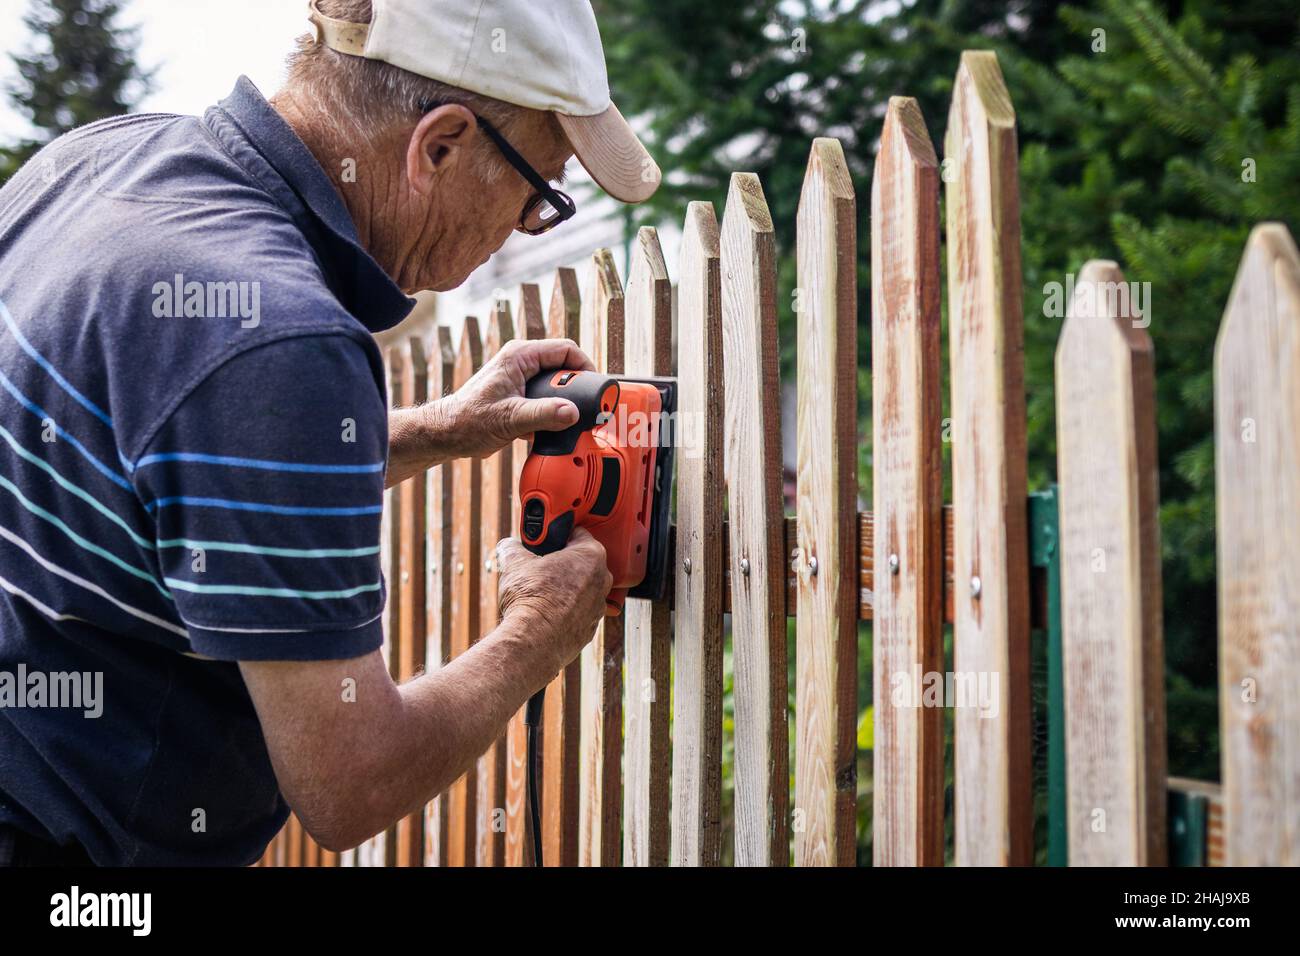 Sanding and preparing wooden fence for painting. Senior man restoring picket fence in garden Stock Photo